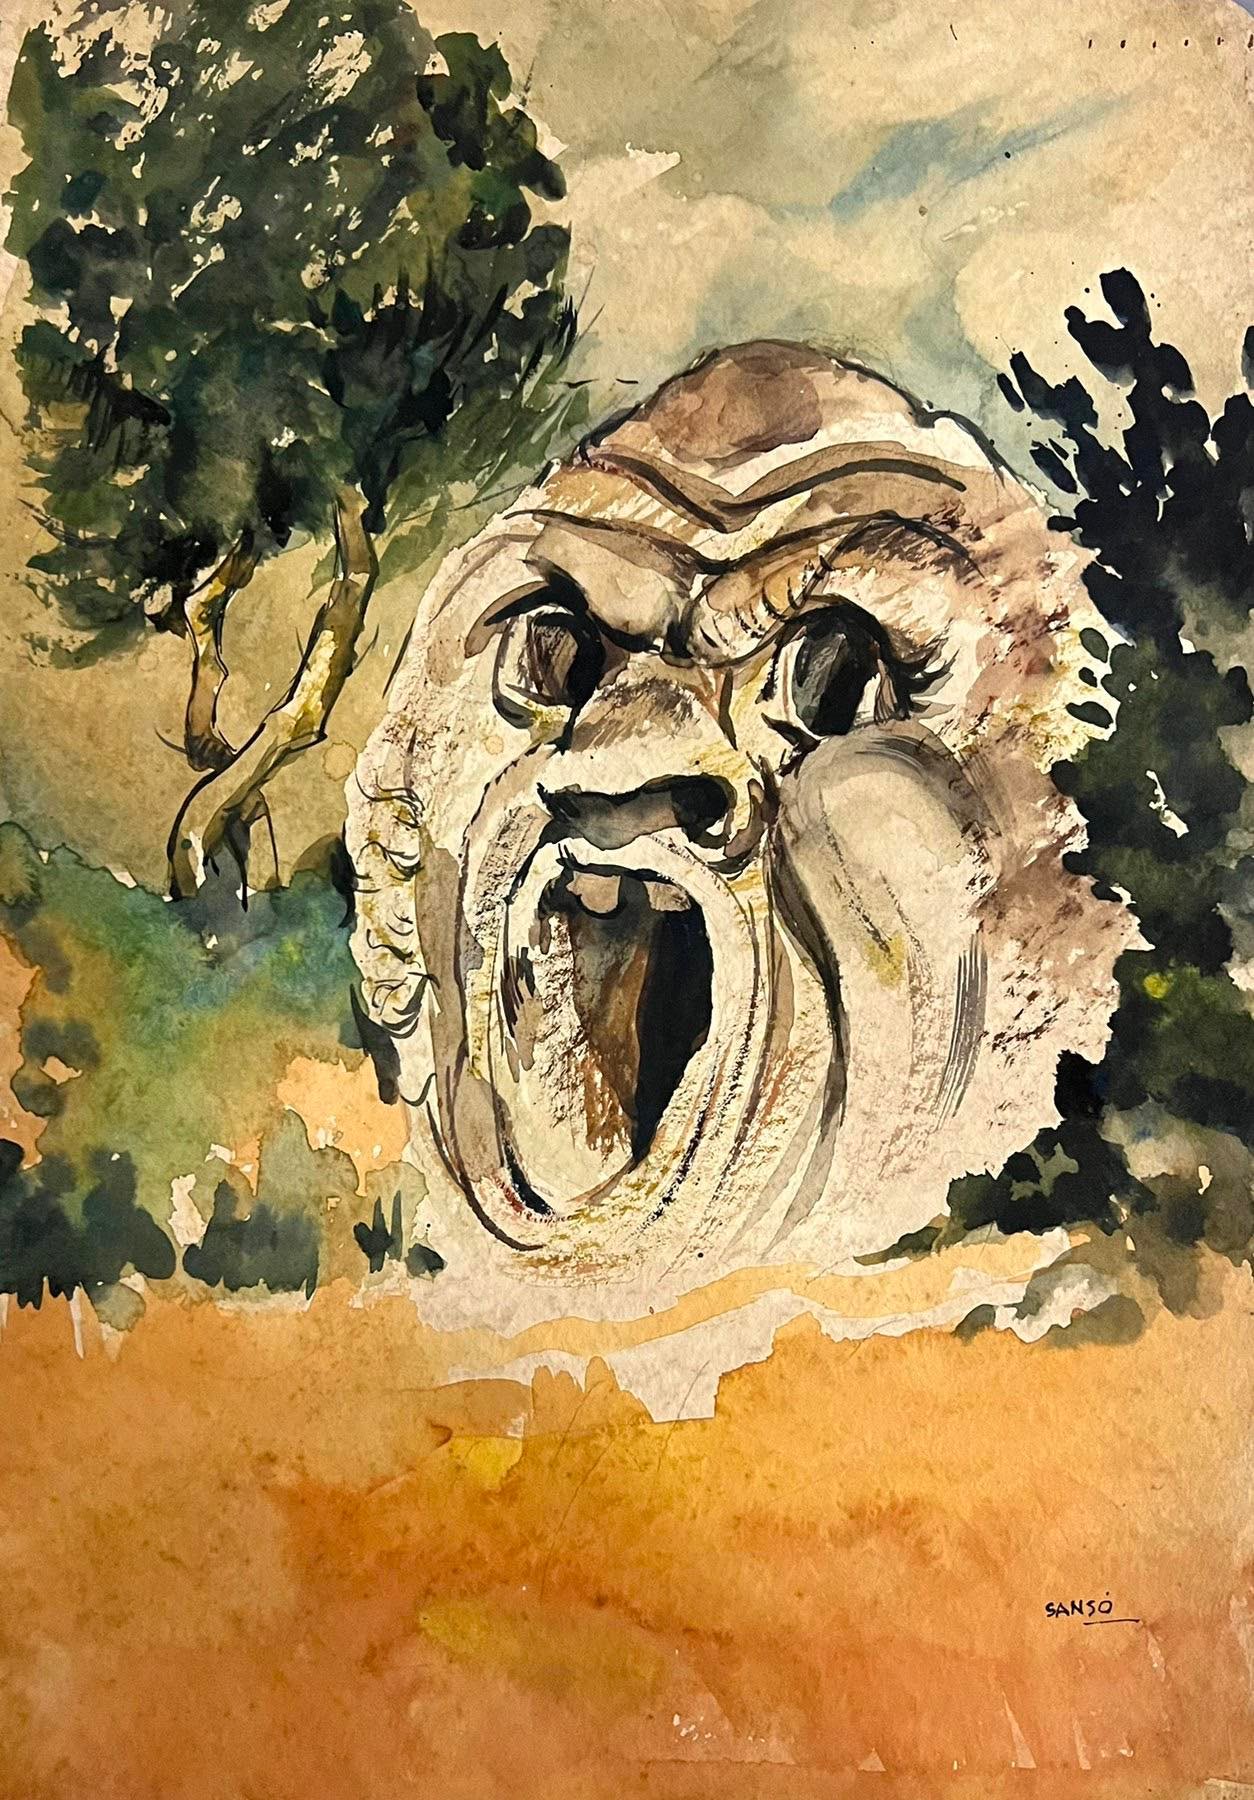 "A Bomarzo Monster" (1952, watercolor) by Sansó 